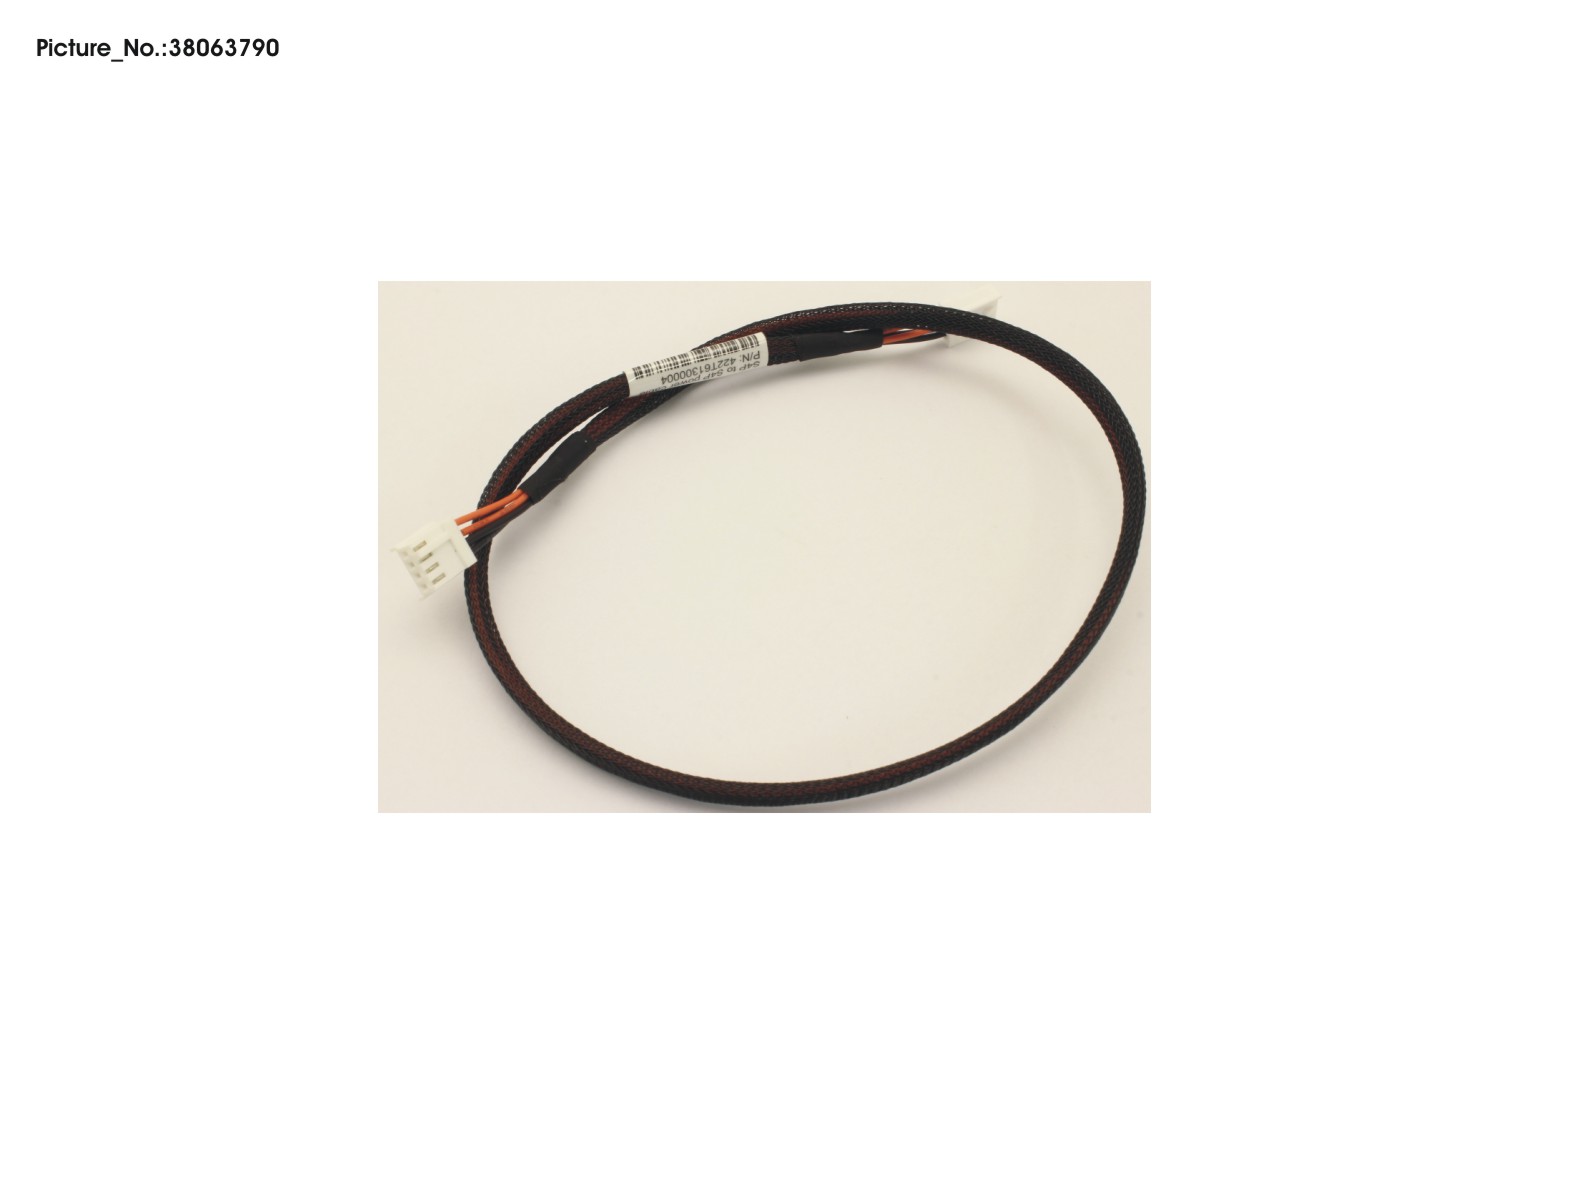 S4P TO S4P POWER CABLE